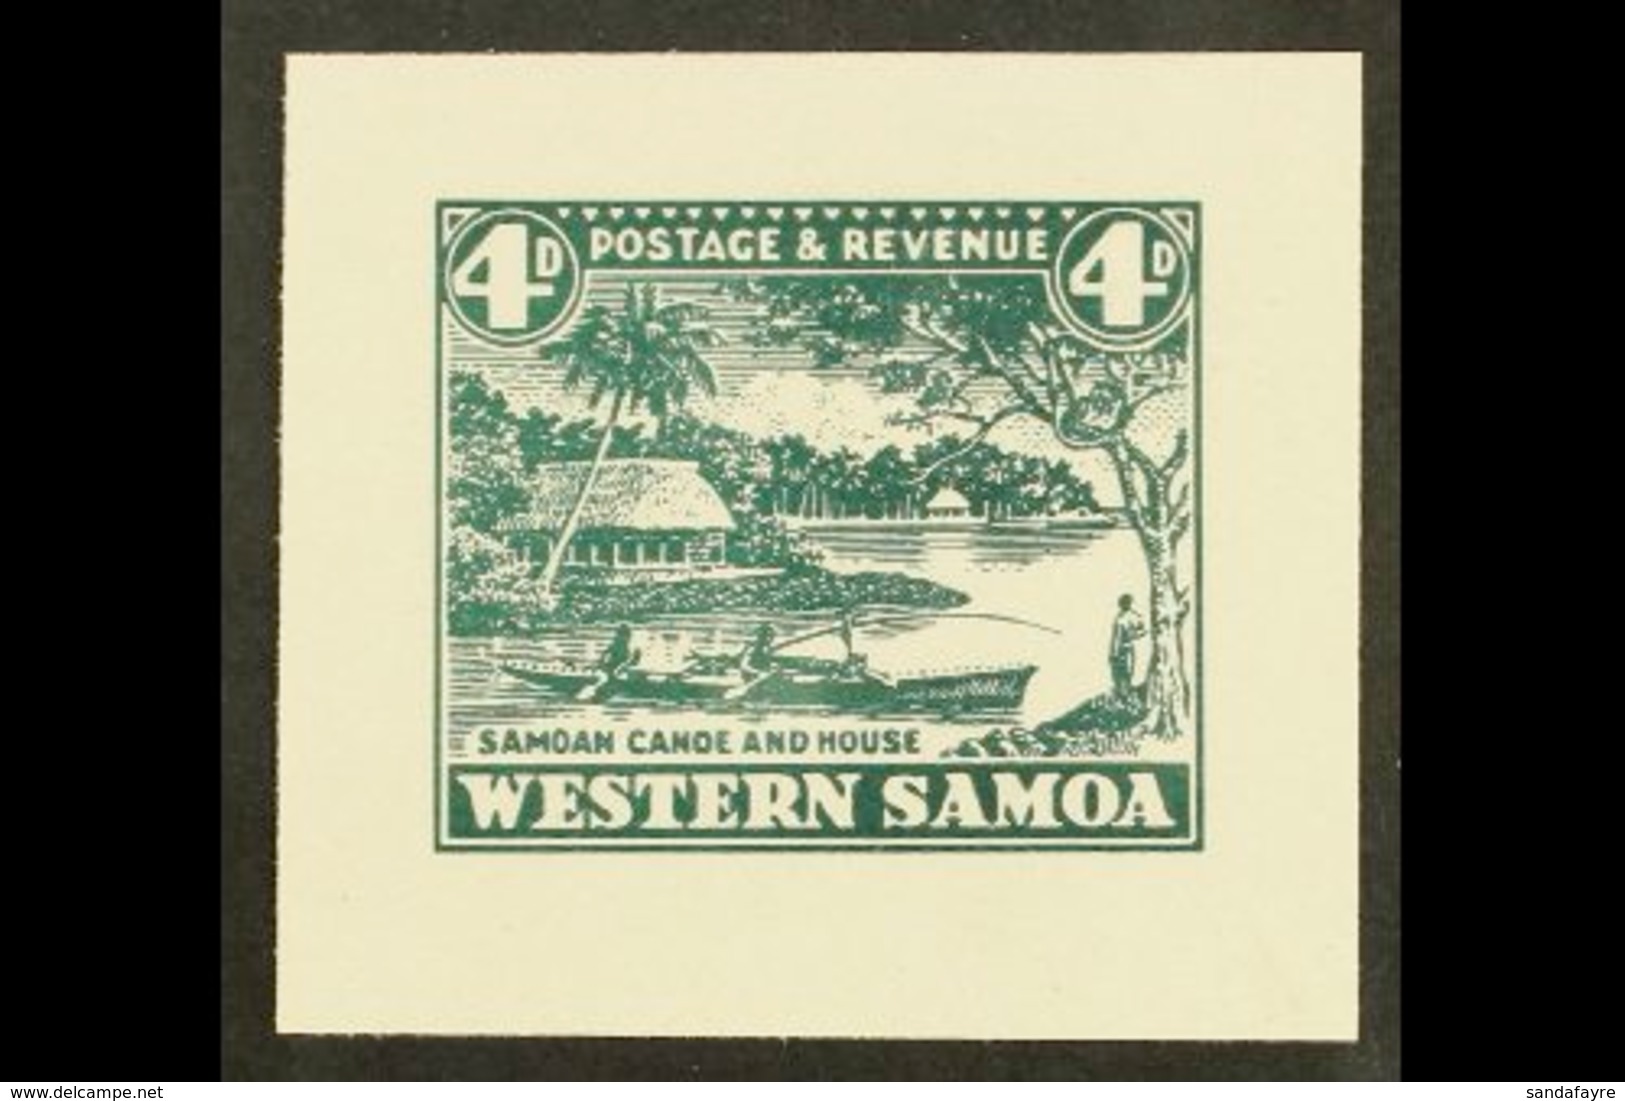 1935 PICTORIAL DEFINITIVE ESSAY Collins Essay For The 4d Value In Dark Green On Thick White Paper, The "Samoan Canoe And - Samoa